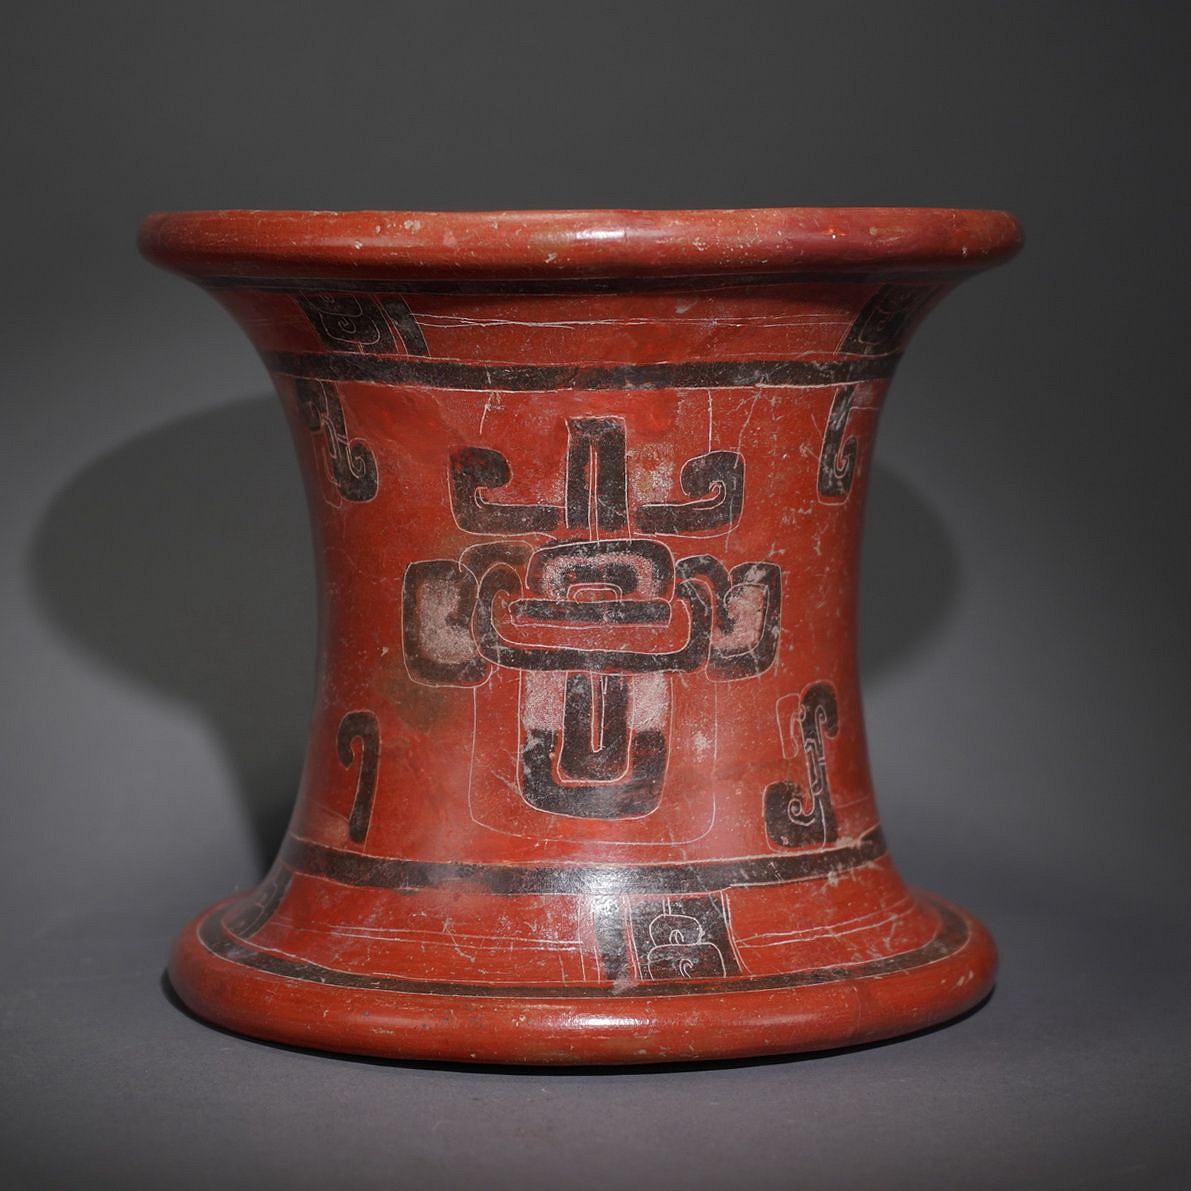 Costa Rica, Rosales Ceramic Pedestal  Engraved with Glyph Designs
This pedestal is decorated with incised glyphs outlined in black on red ground in three registers.  The Rosales artists' ceramics  were highly prized and were  traded throughout the Nacoya peninsula.
Media: Ceramic
Dimensions: Diameter 7 1/4" Height 6 1/2"
$4,450
94114